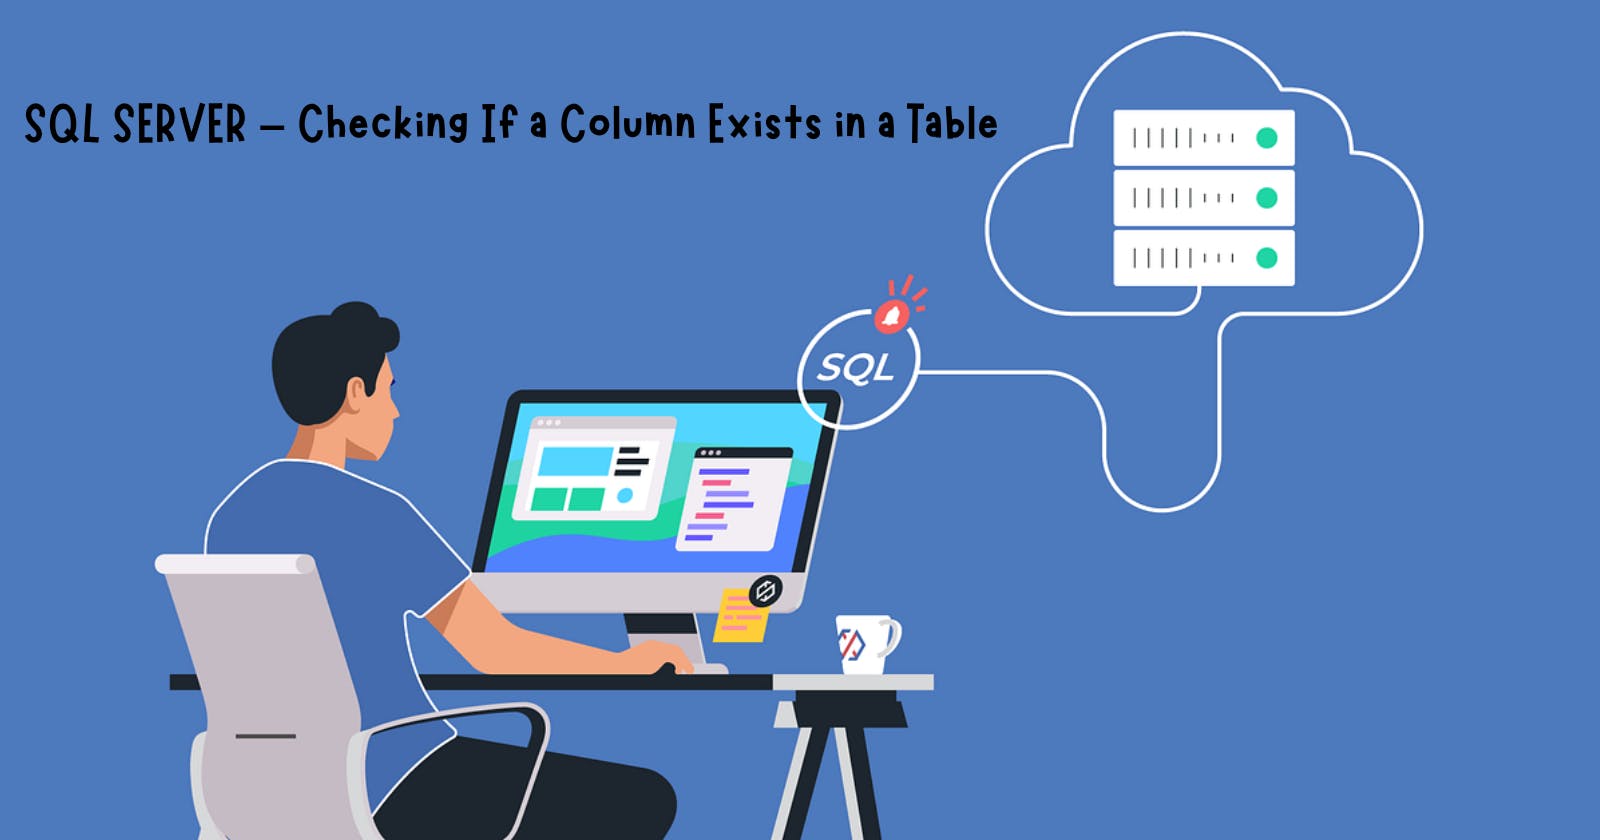 SQL SERVER – Checking If a Column Exists in a Table